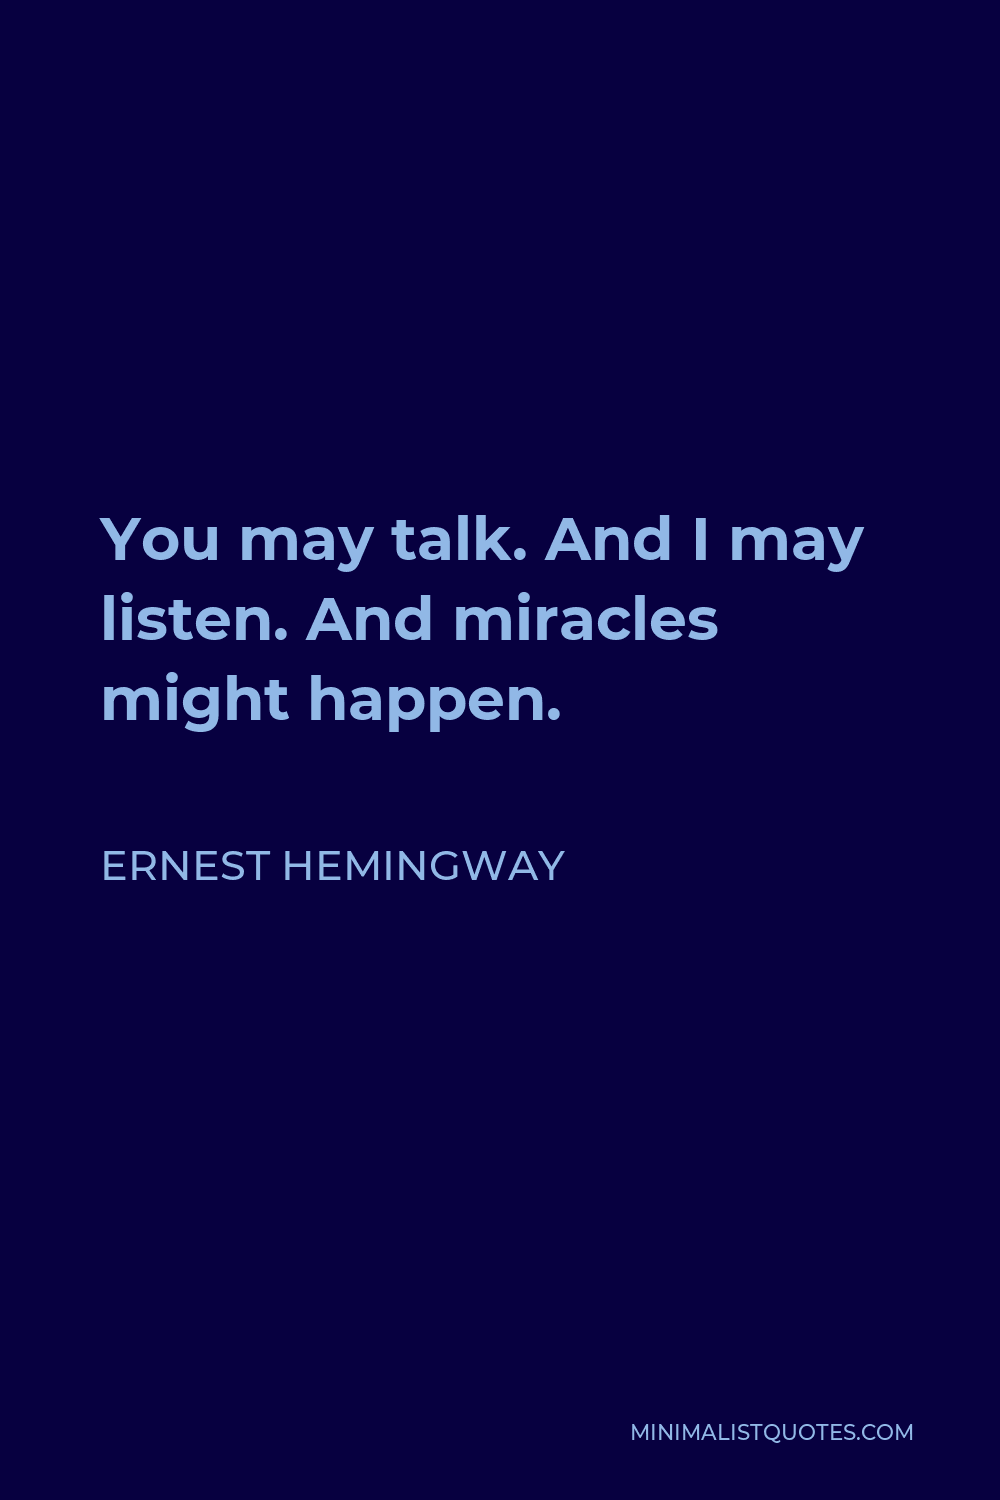 Ernest Hemingway Quote - You may talk. And I may listen. And miracles might happen.